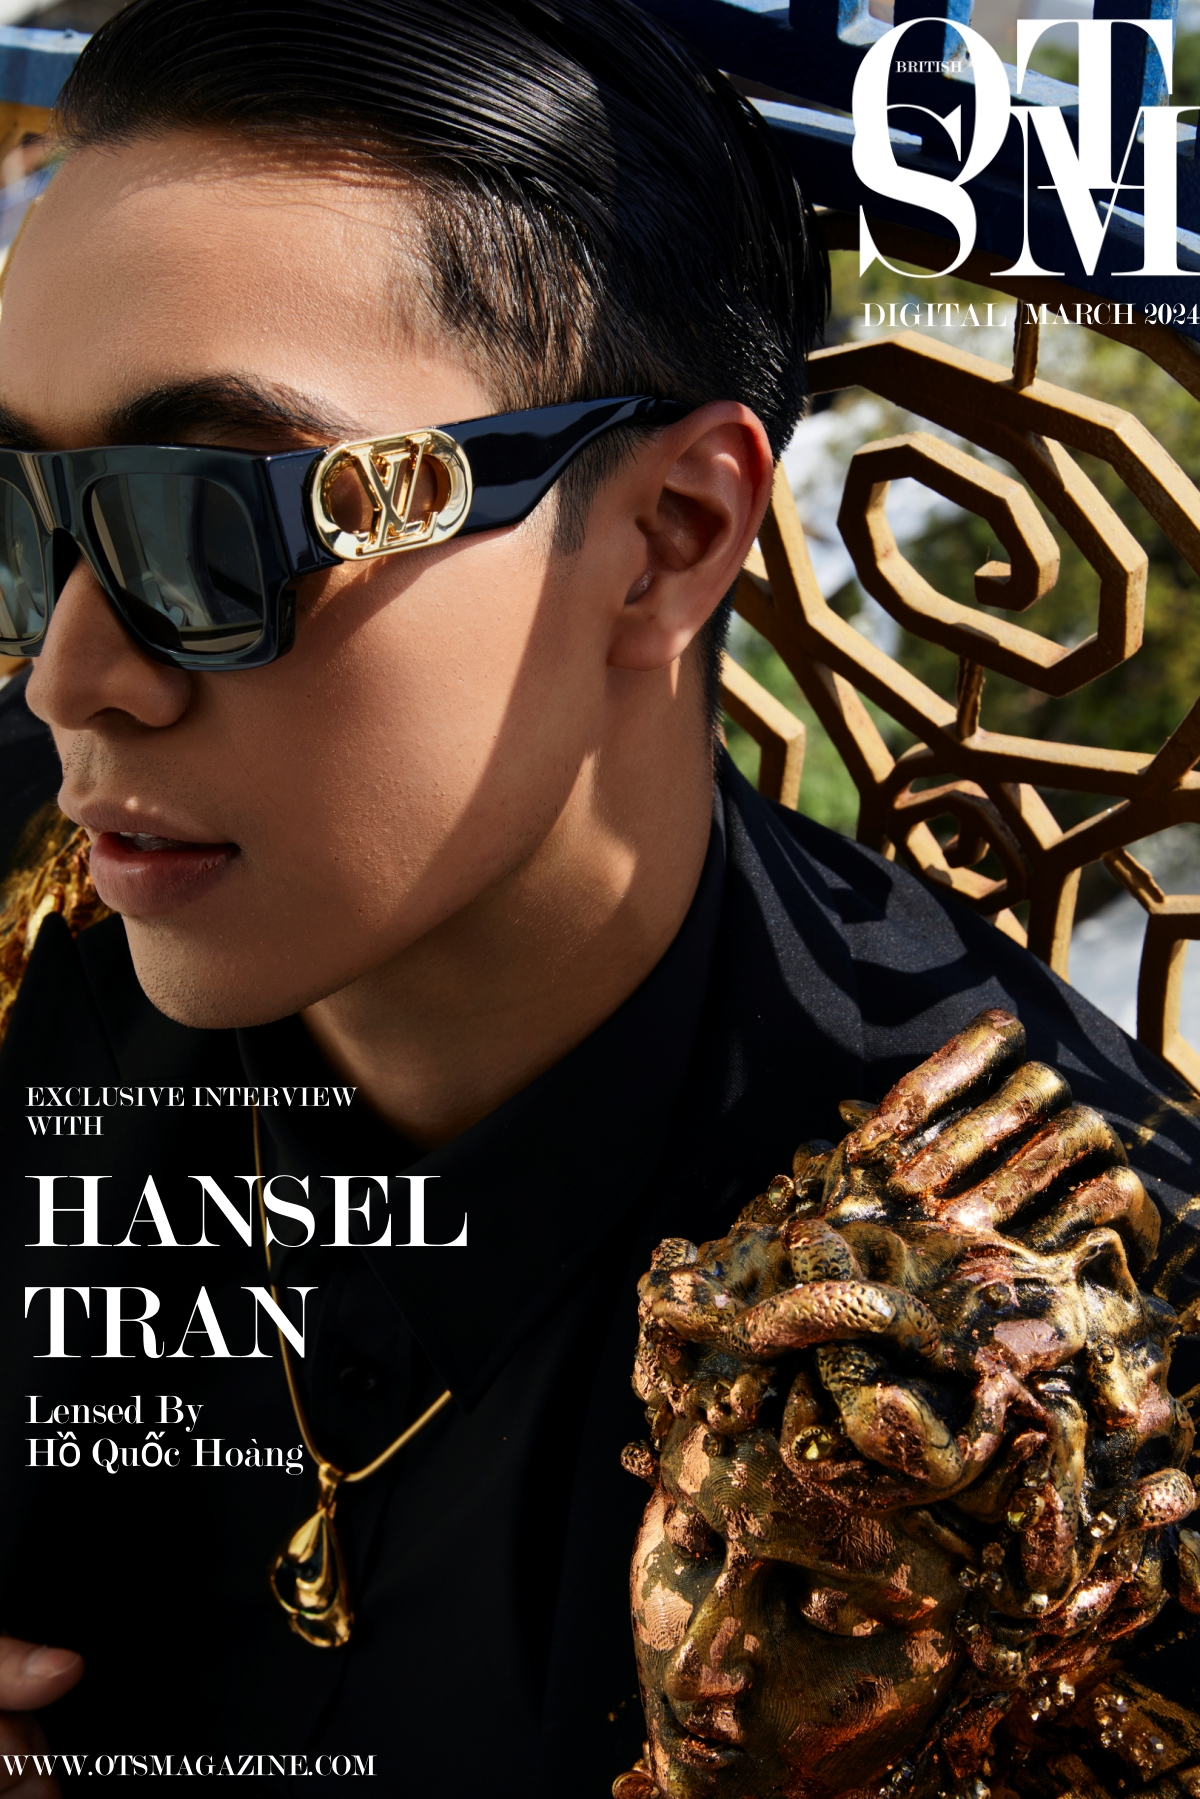 Fitness,Runway and Fashion Model 'Hansel Tran' Talks Exclusively for OTS Magazine.